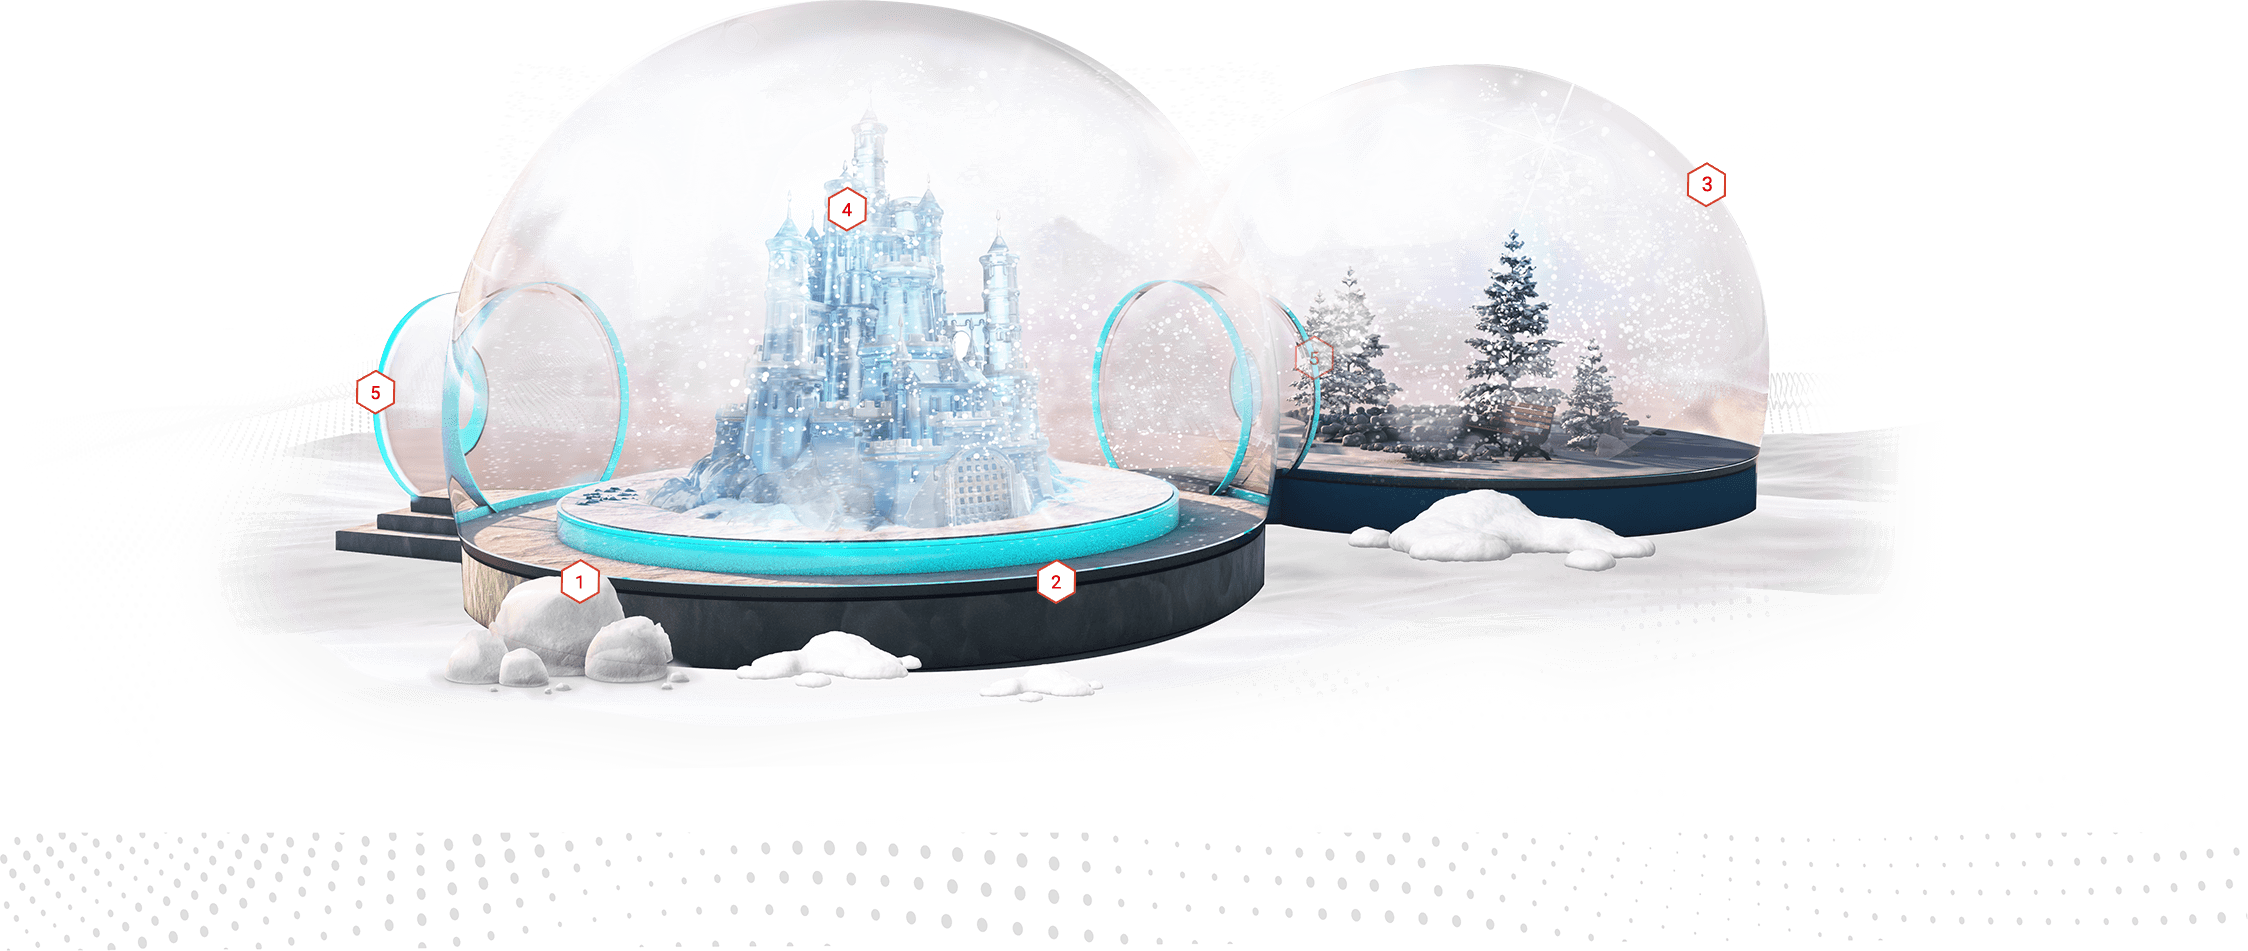 Giant Snow Globe - see connected our bubble tents for rental or sale